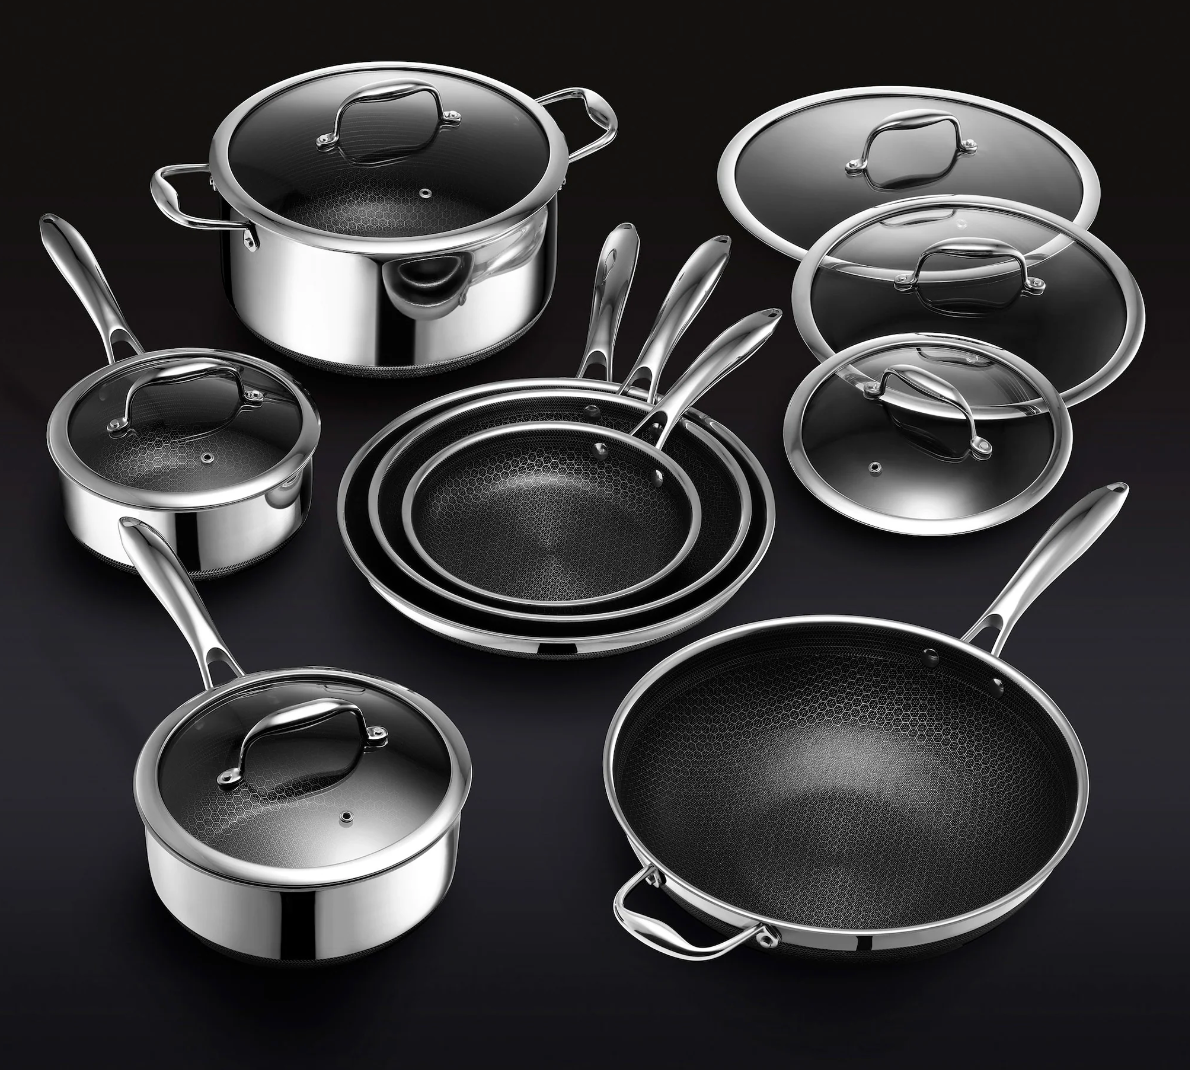 Oprah-Loved HexClad Cookware Just Launched a New Lightweight Dutch Oven &  It's Already on Sale